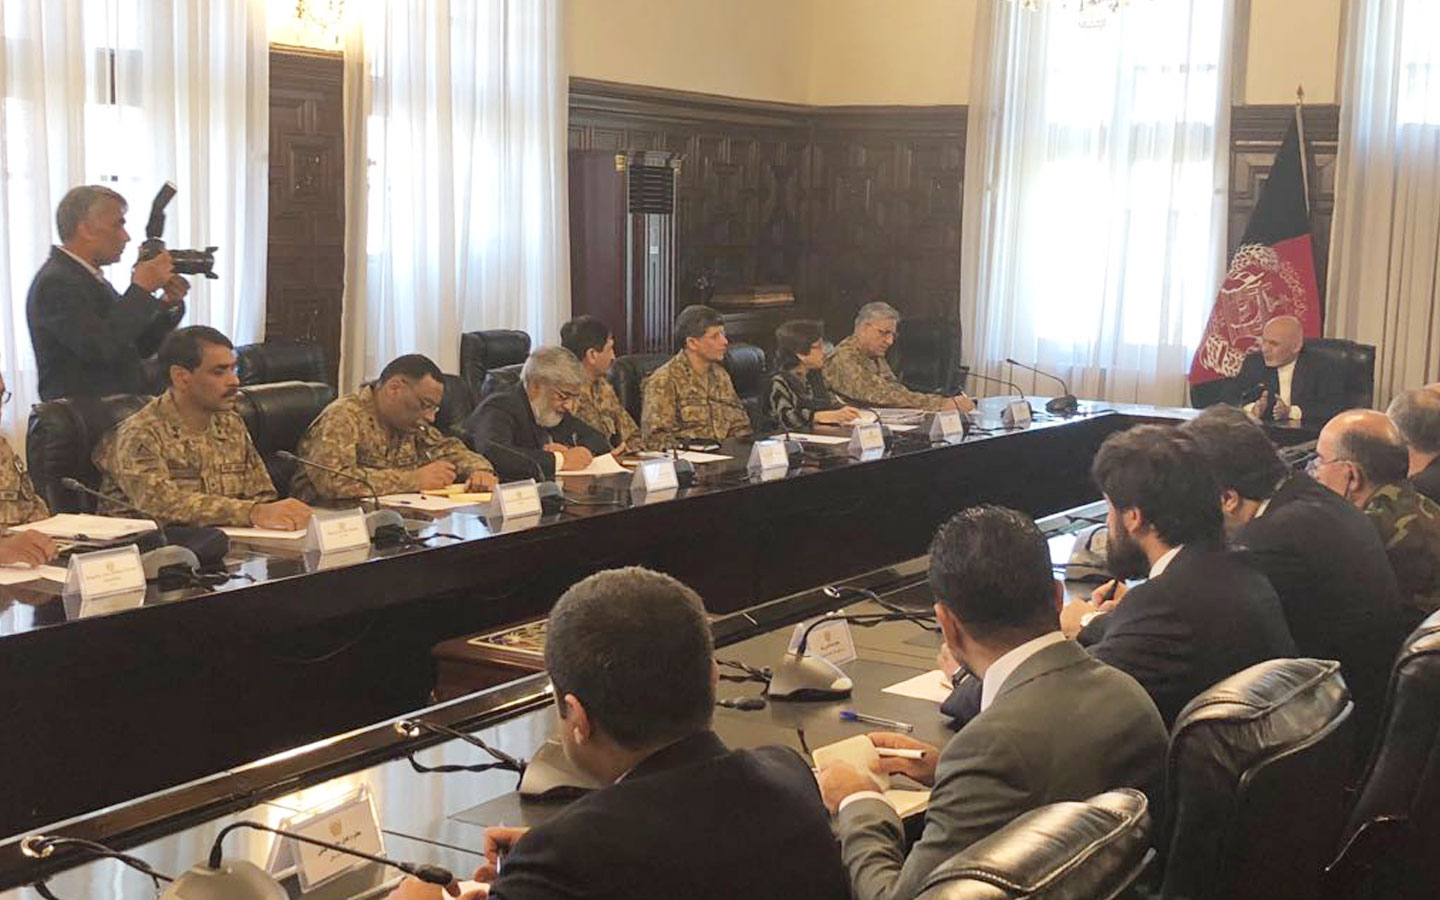 Army chief meets Afghan president in Kabul visit